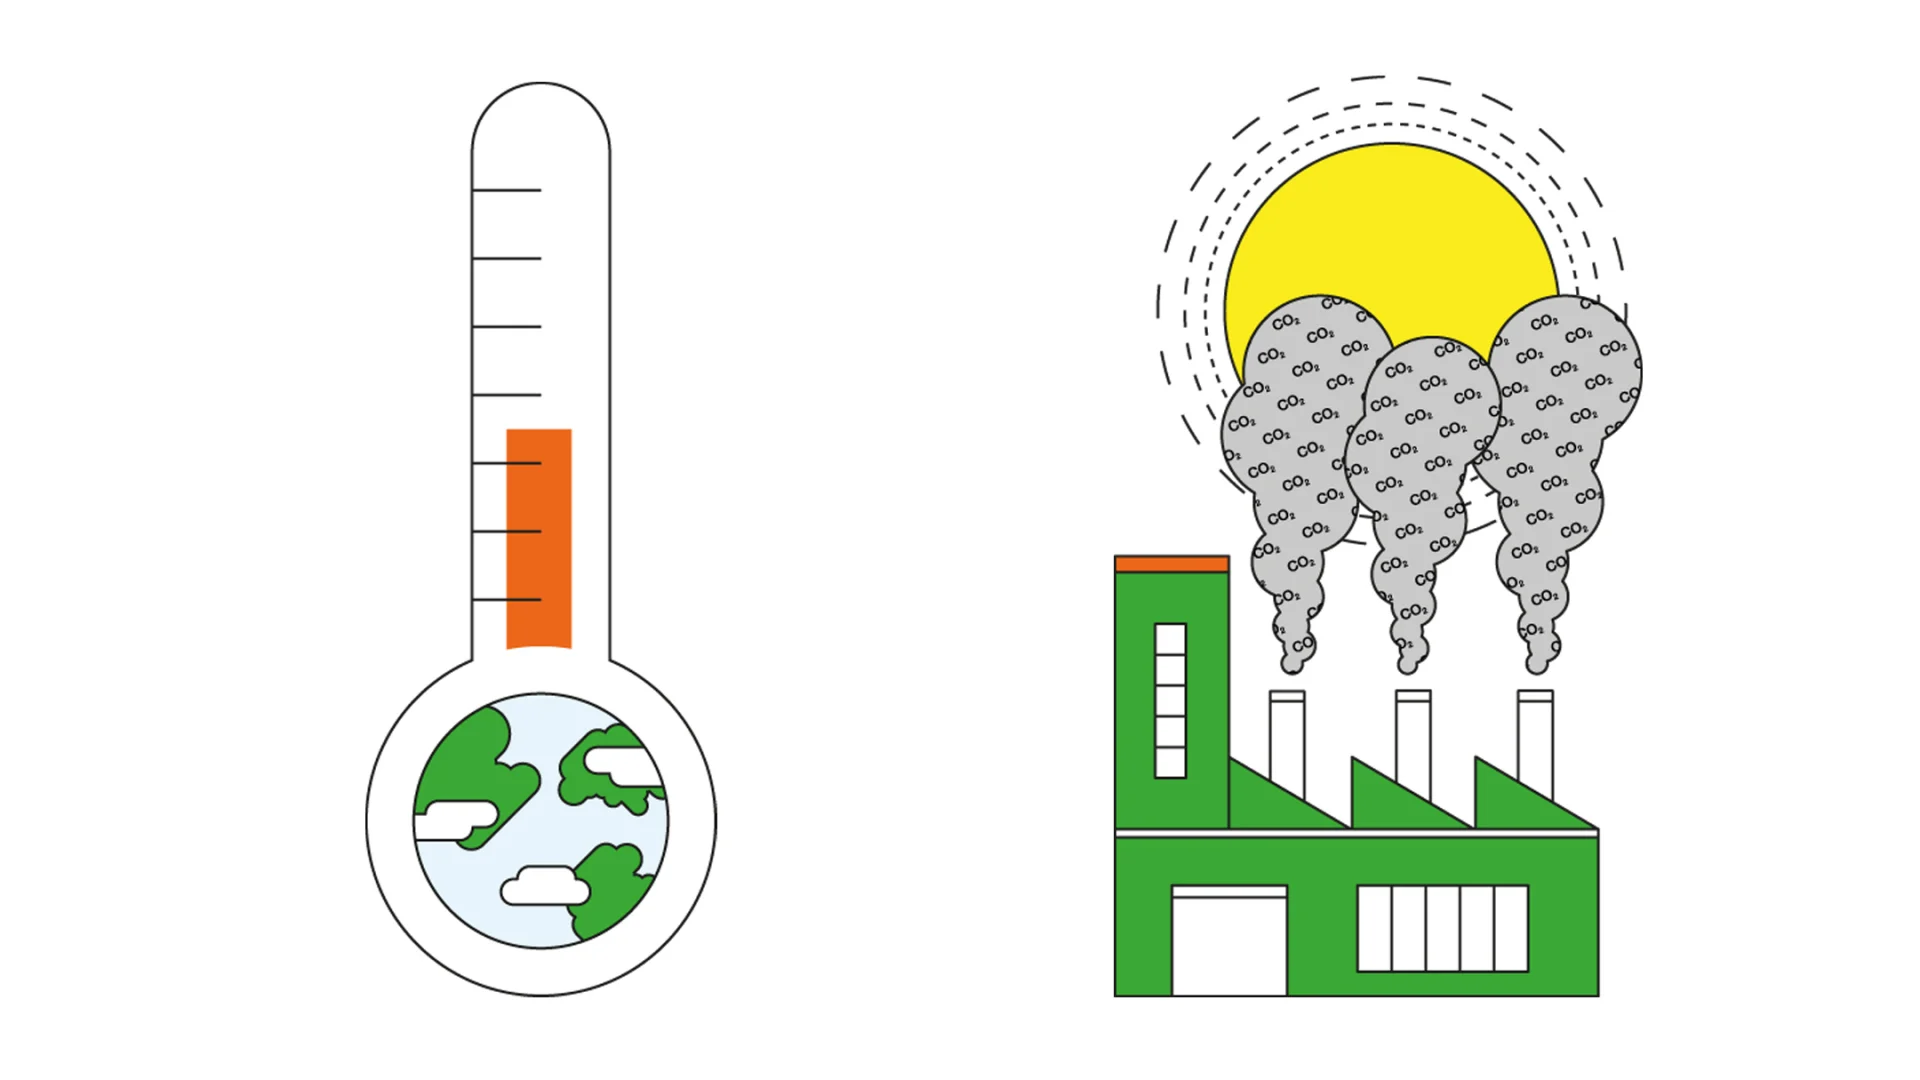 The illustration shows a thermometer indicating a high temperature. Next to this there is a factory whose chimneys are emitting smoke that is obscuring the sun.